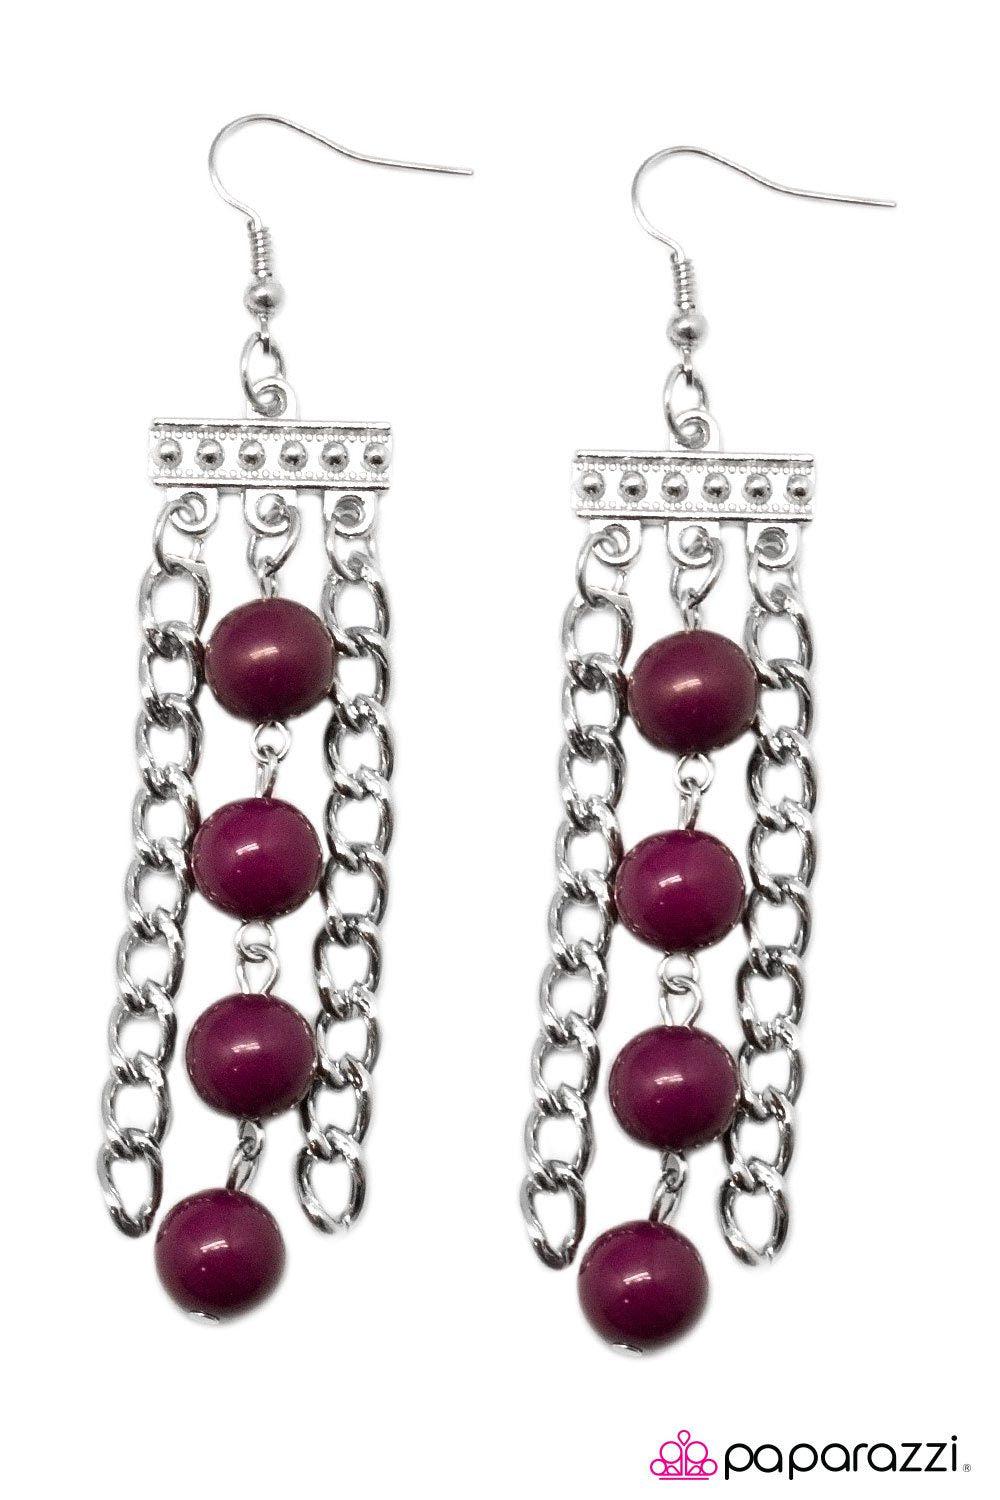 Middle Ground Silver and Purple Earrings - Paparazzi Accessories-CarasShop.com - $5 Jewelry by Cara Jewels